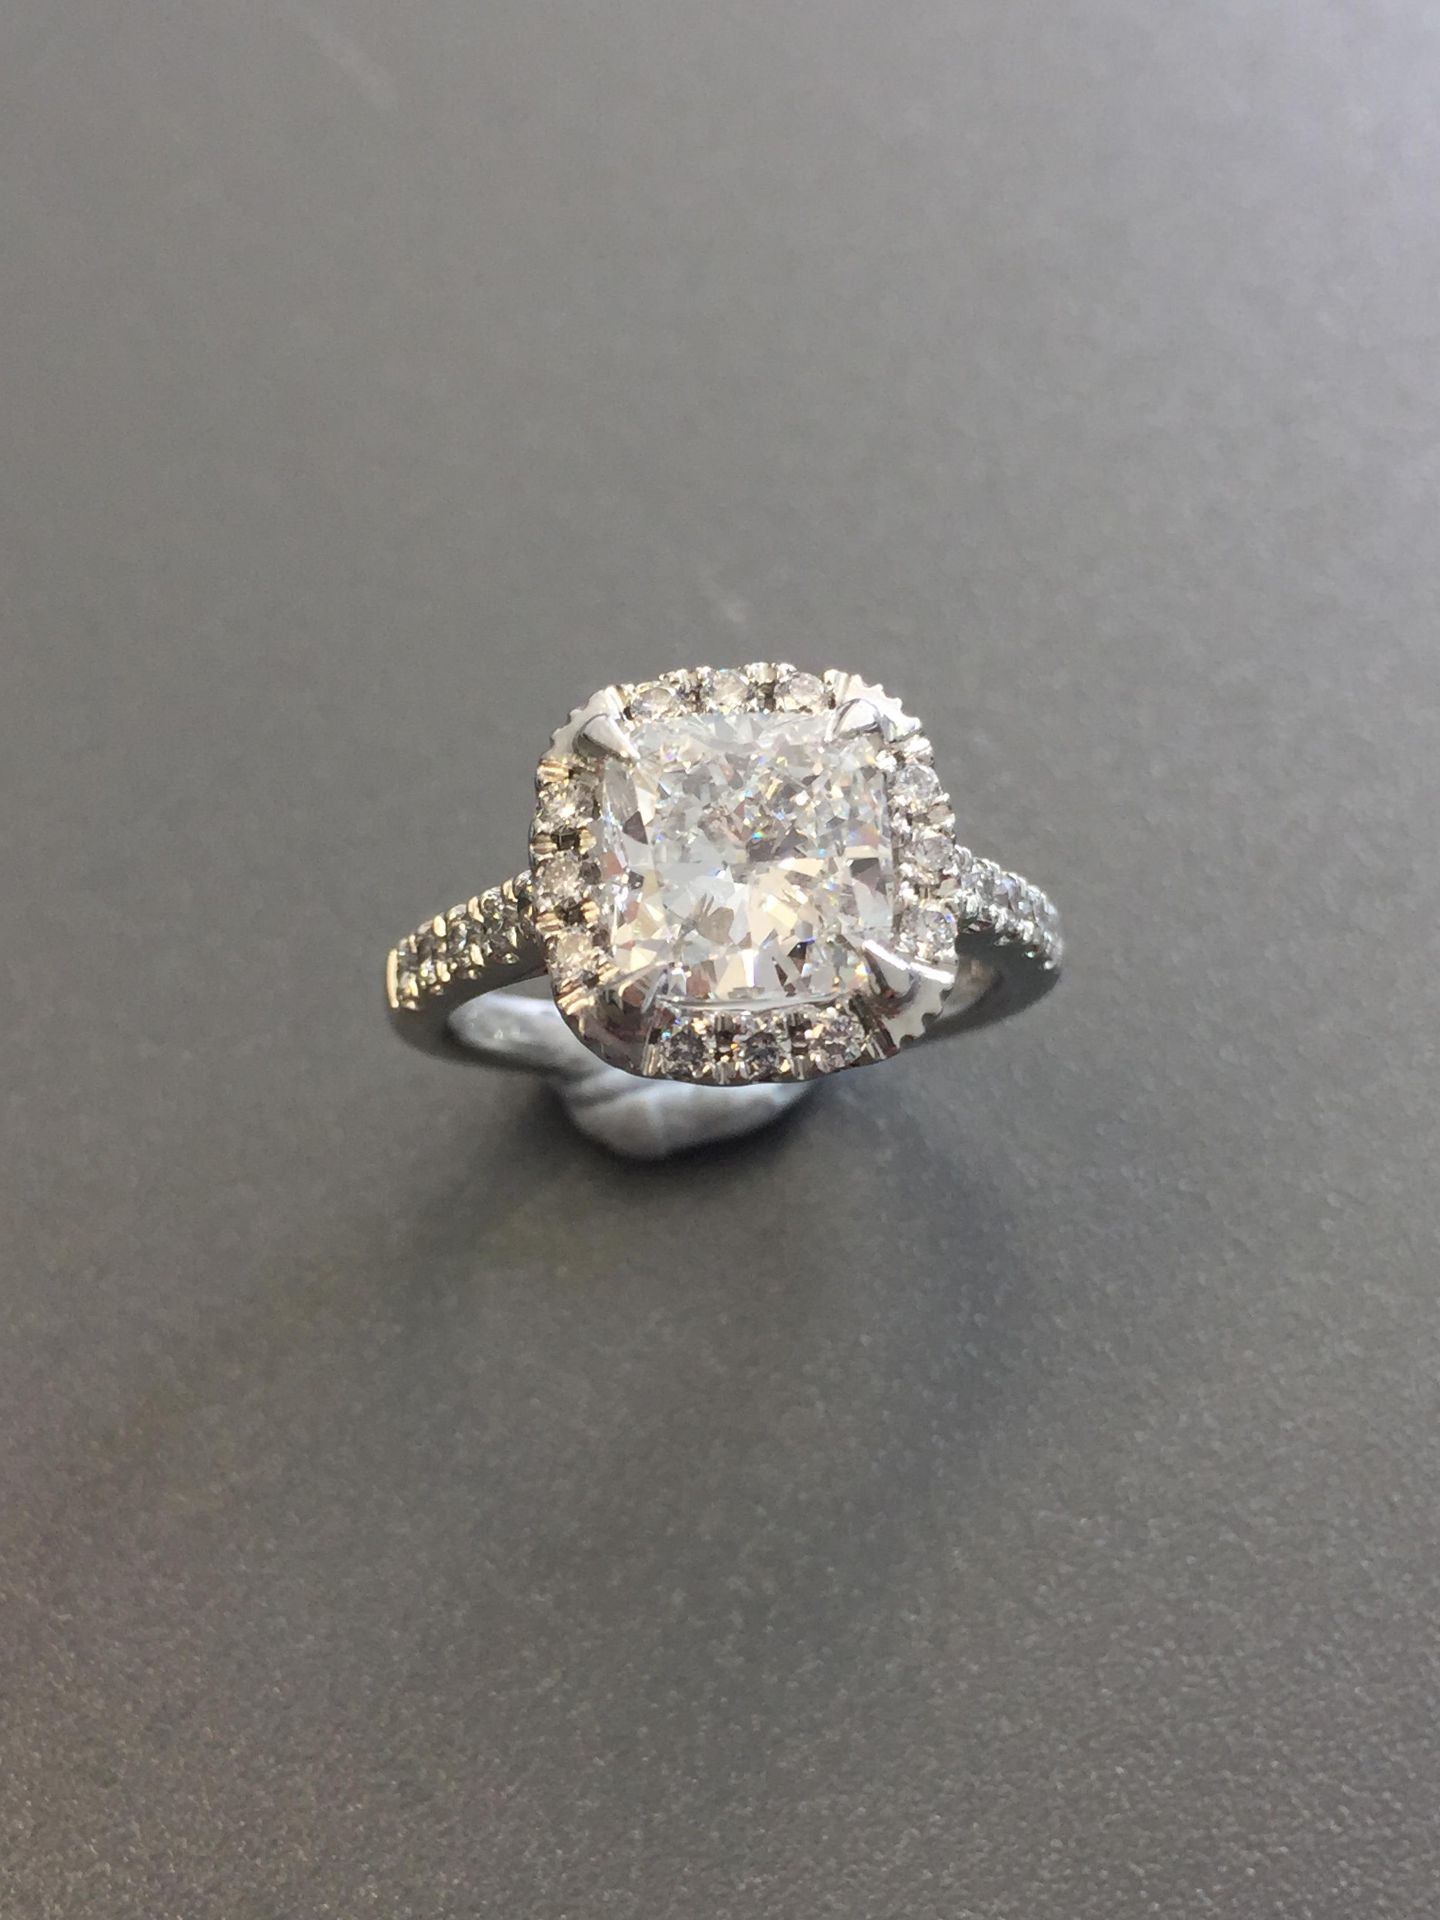 2.11ct diamond set solitaire with a cushion cut diamond, E colour Si1 clarity. Set in platinum - Image 3 of 5